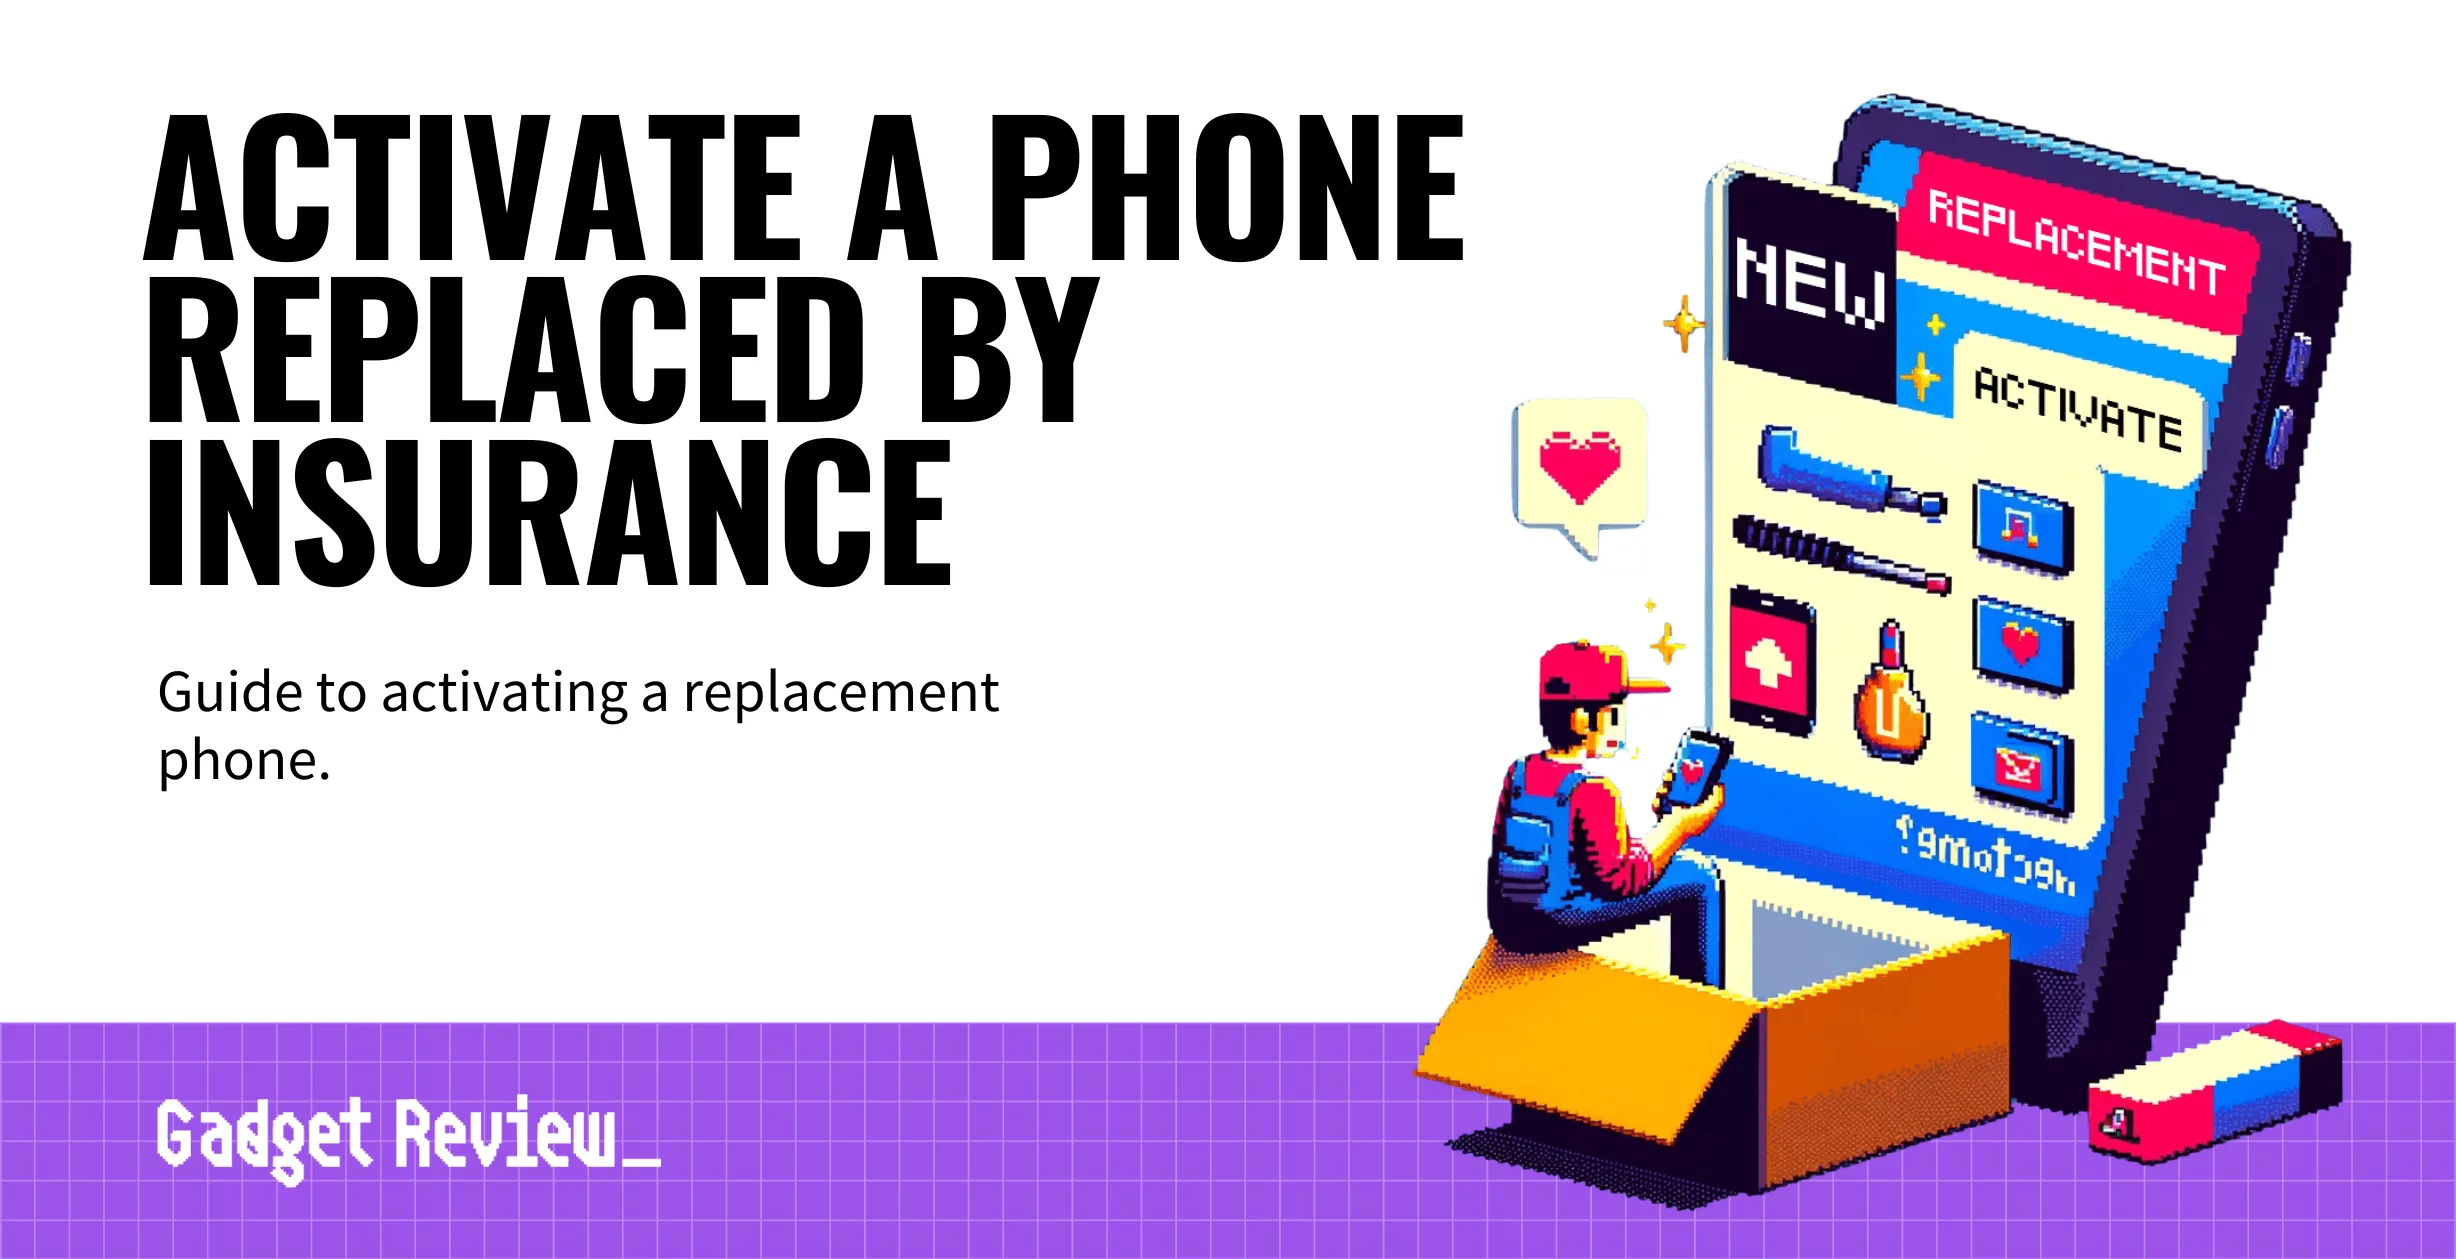 Activate a Phone Replaced by Insurance